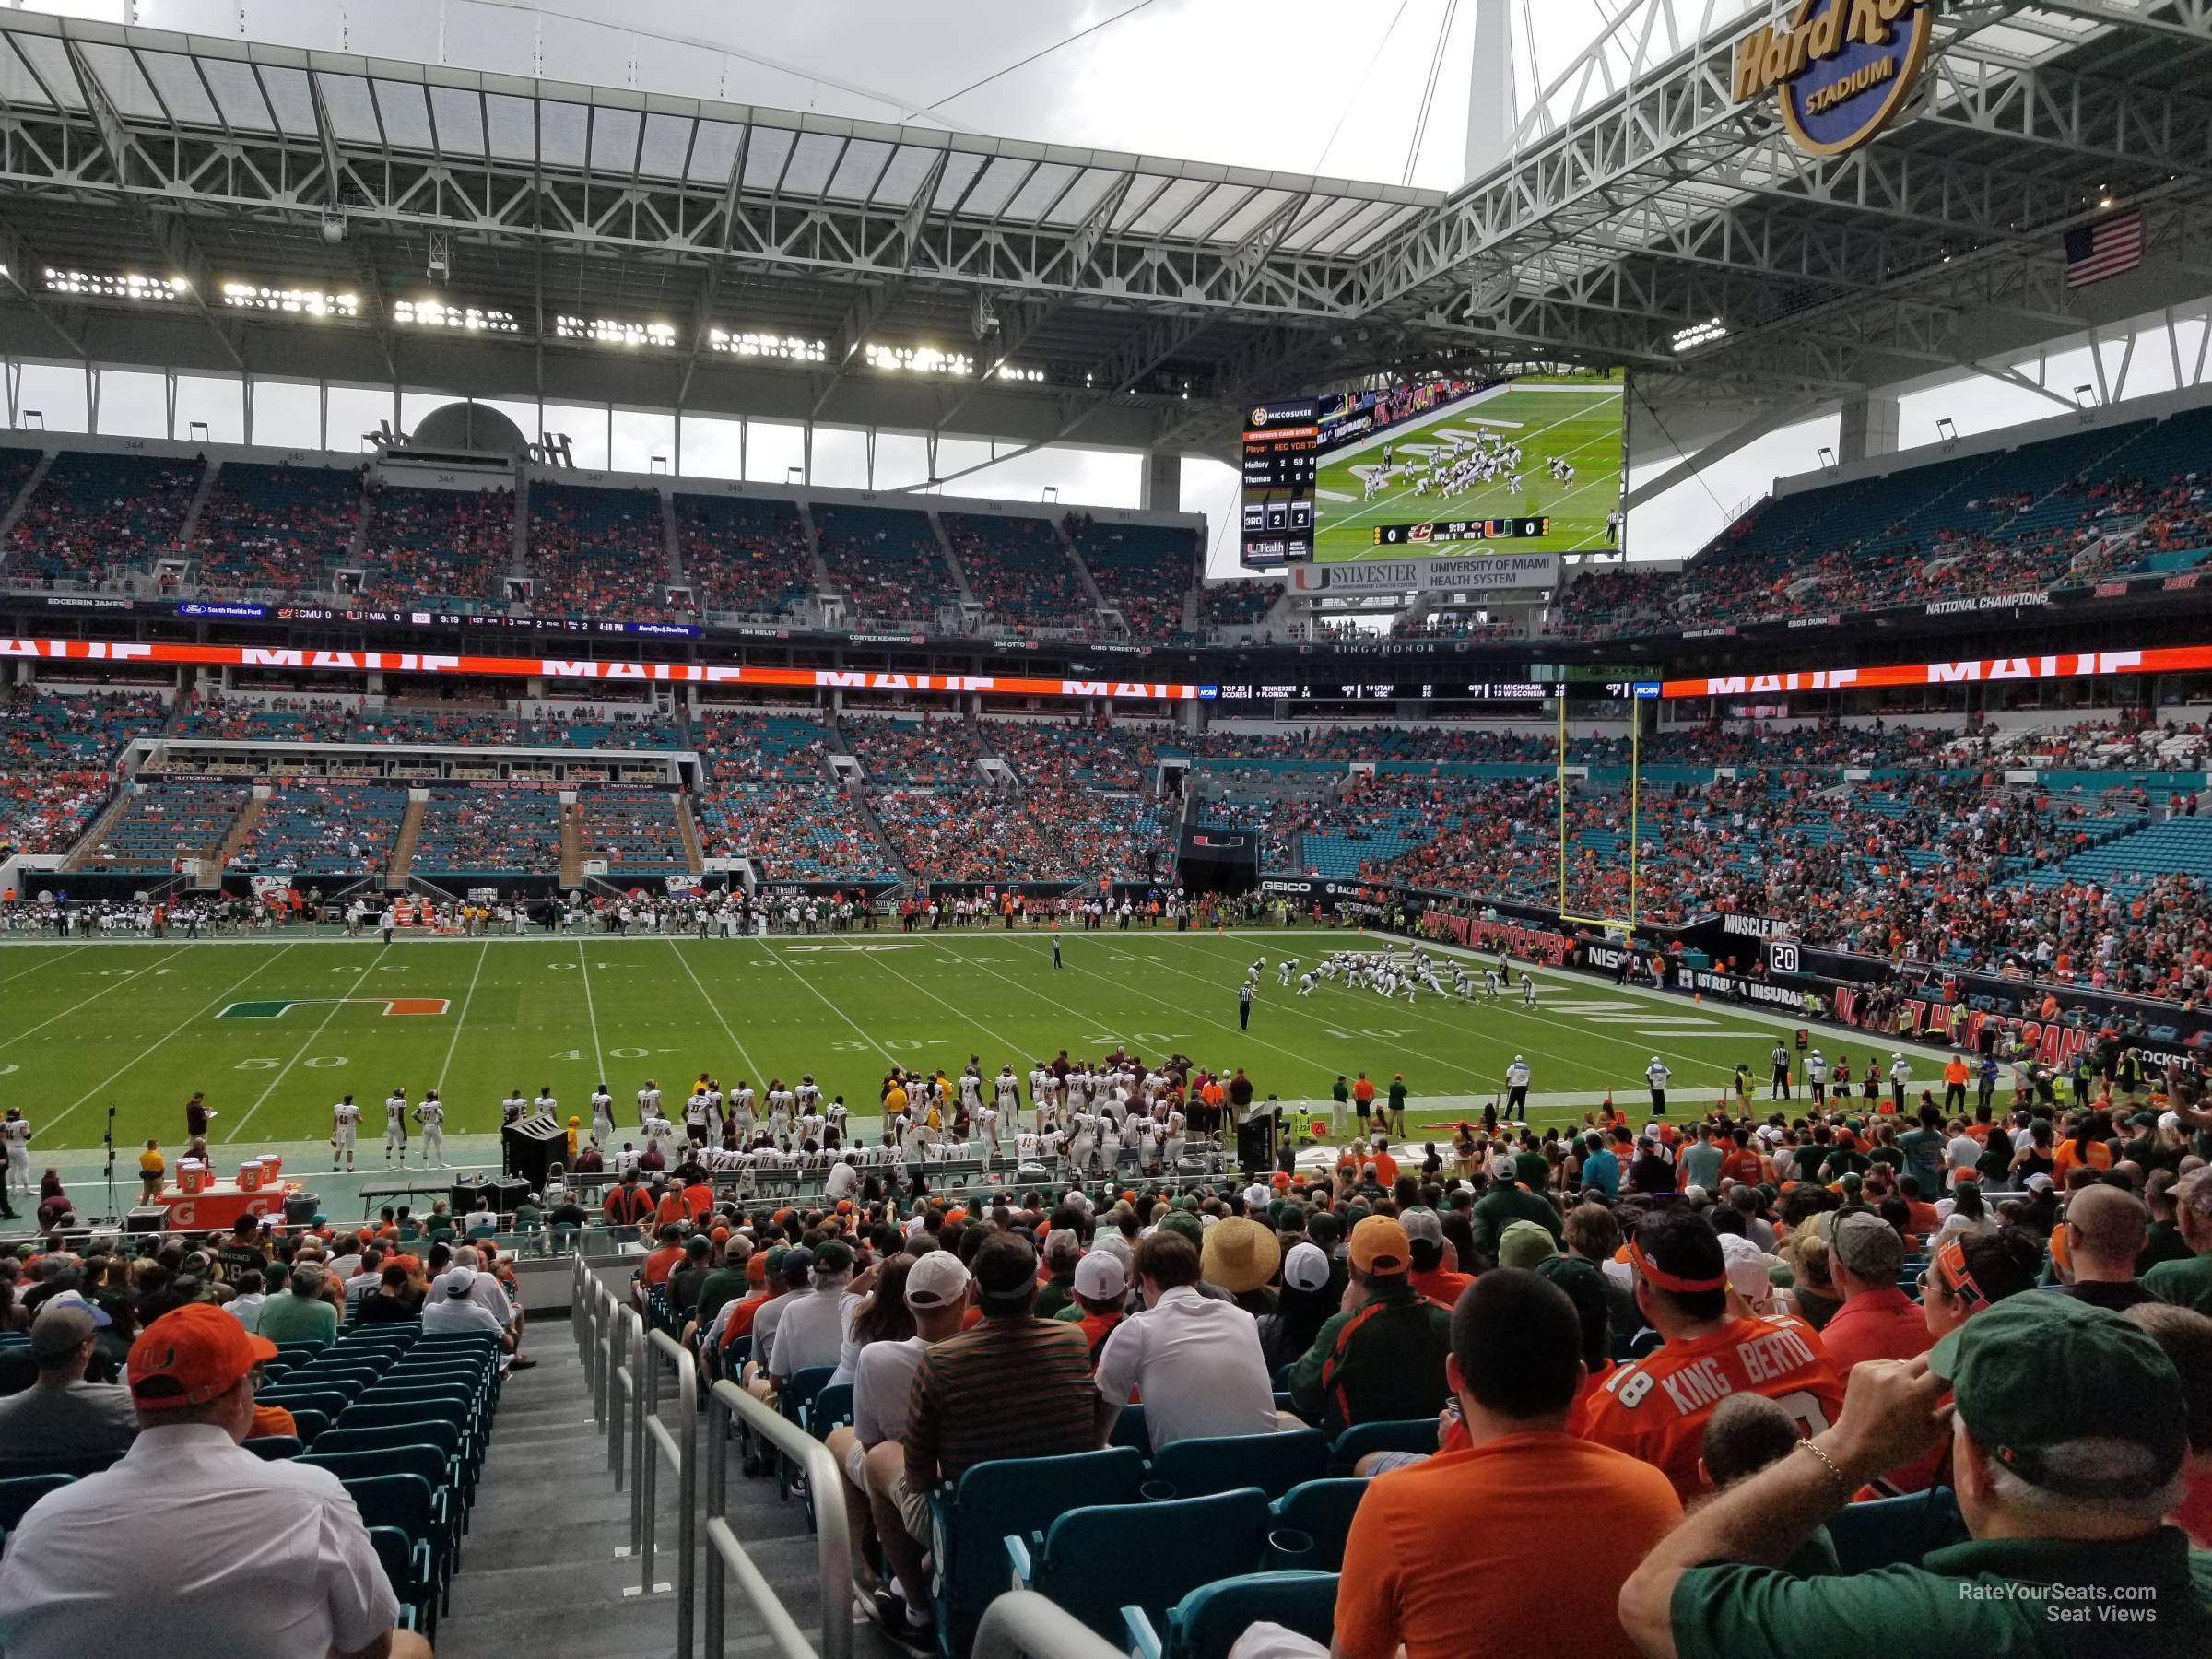 section 117, row 36 seat view  for football - hard rock stadium